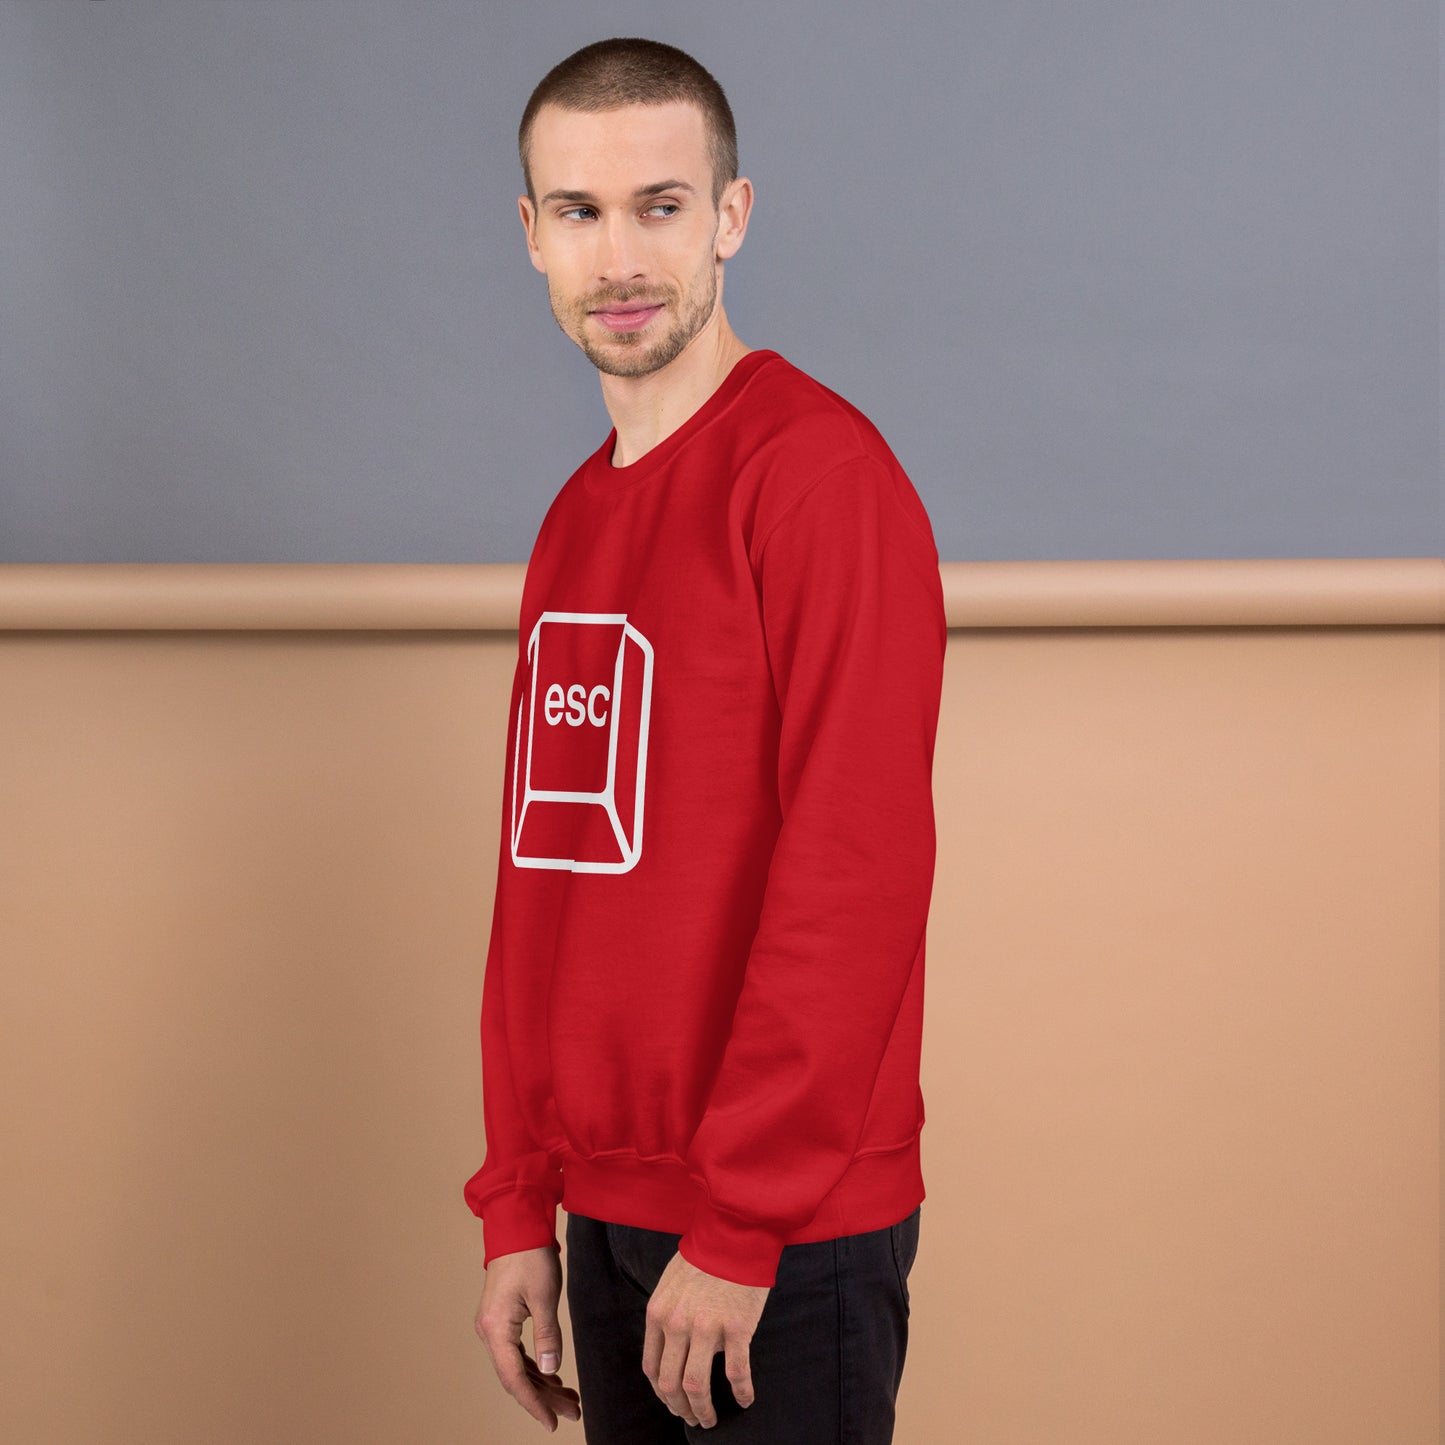 Man with red sweatshirt with picture of esc key